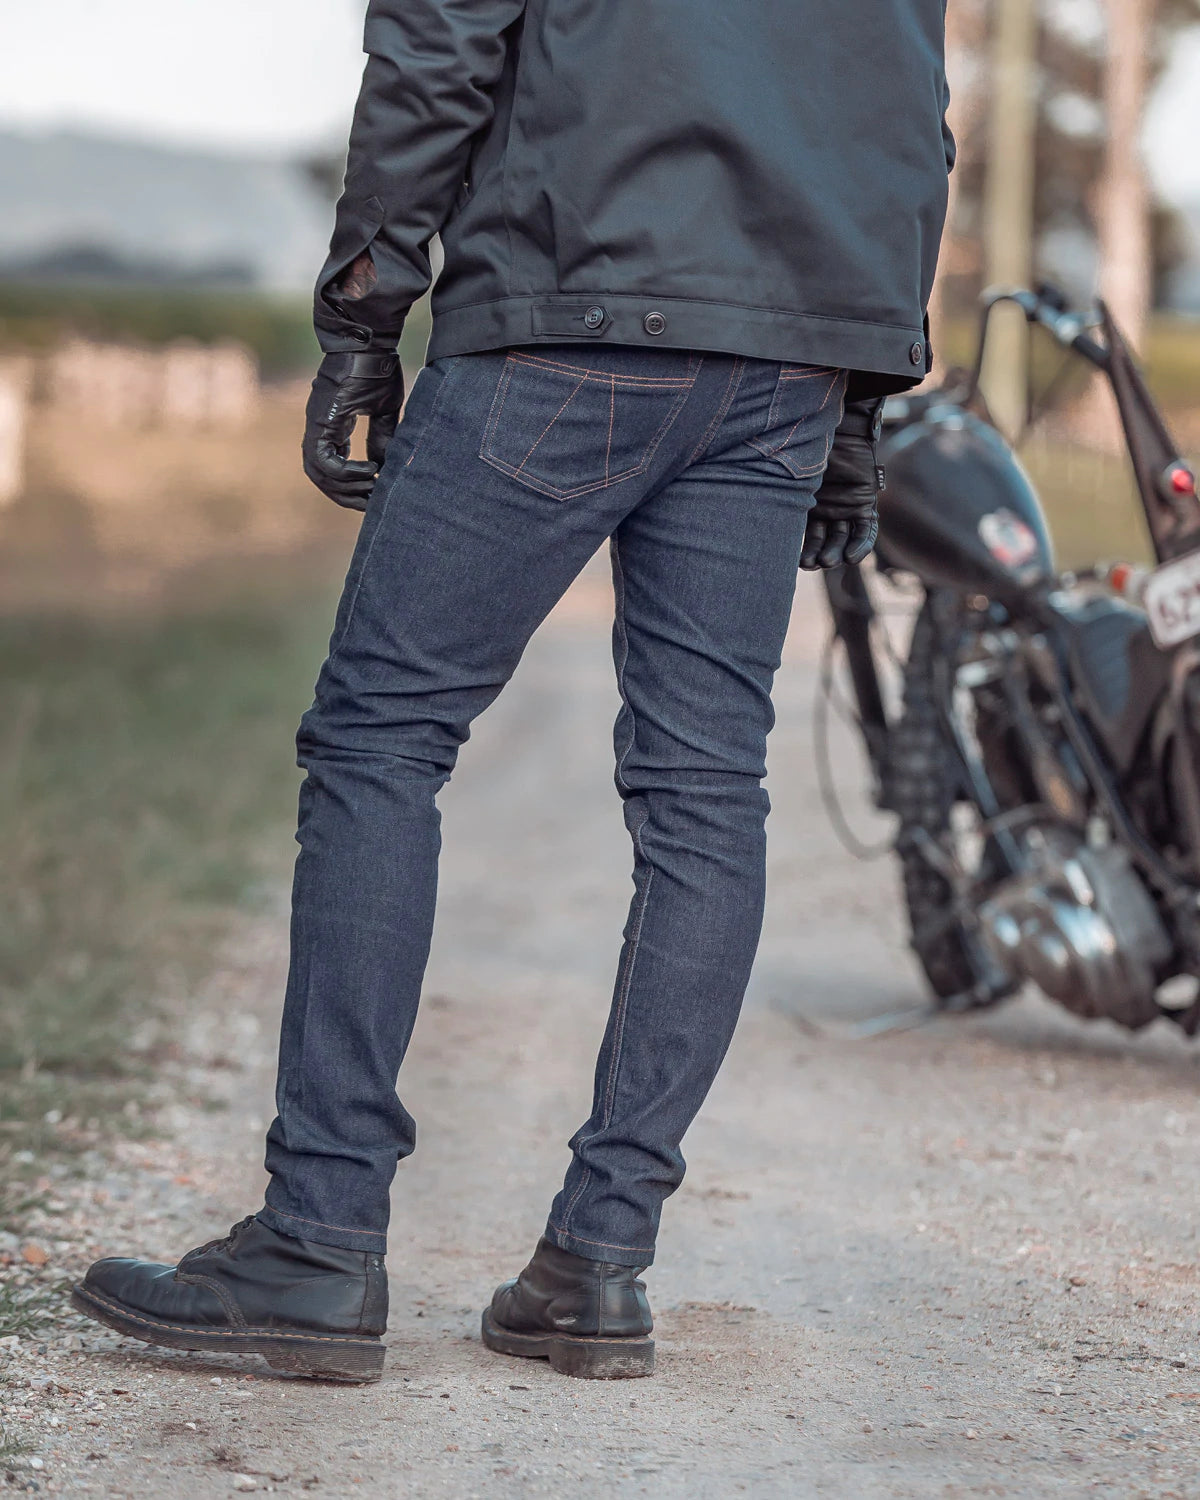 The Best Motorcycle Jeans for Style and Protection